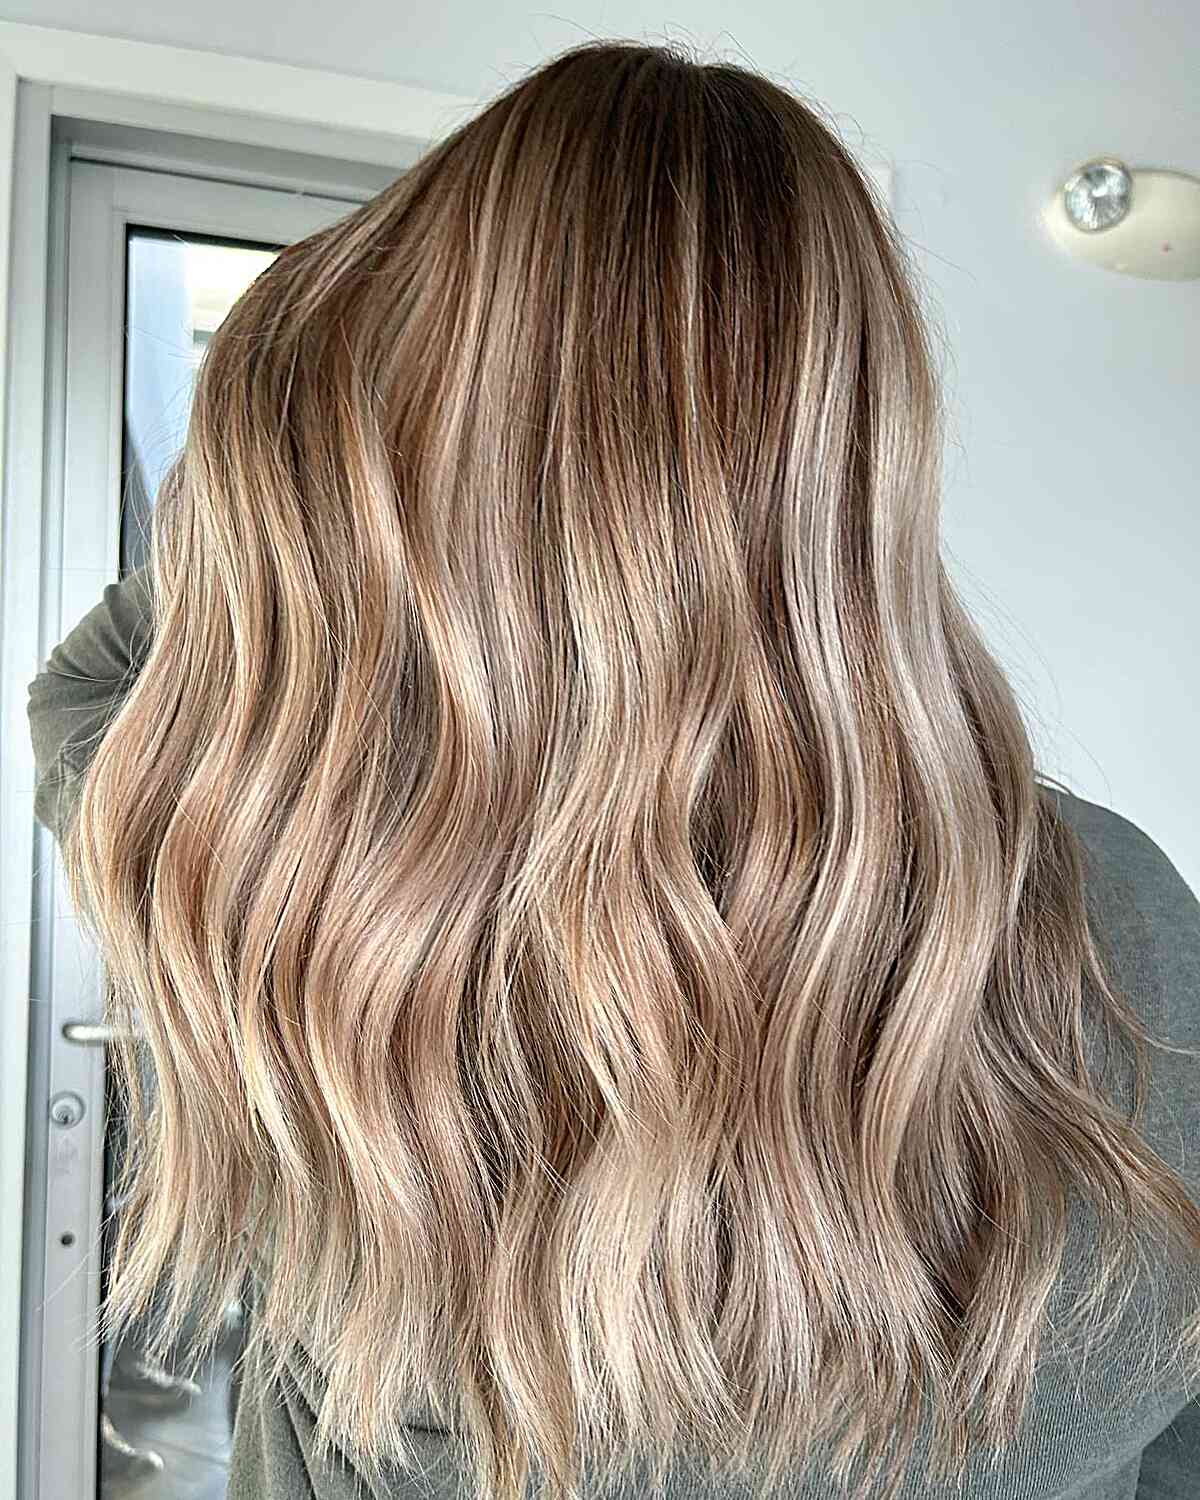 Dimensional Bronde Color Melt with Long Balayage Chunky Waves and Choppy Ends